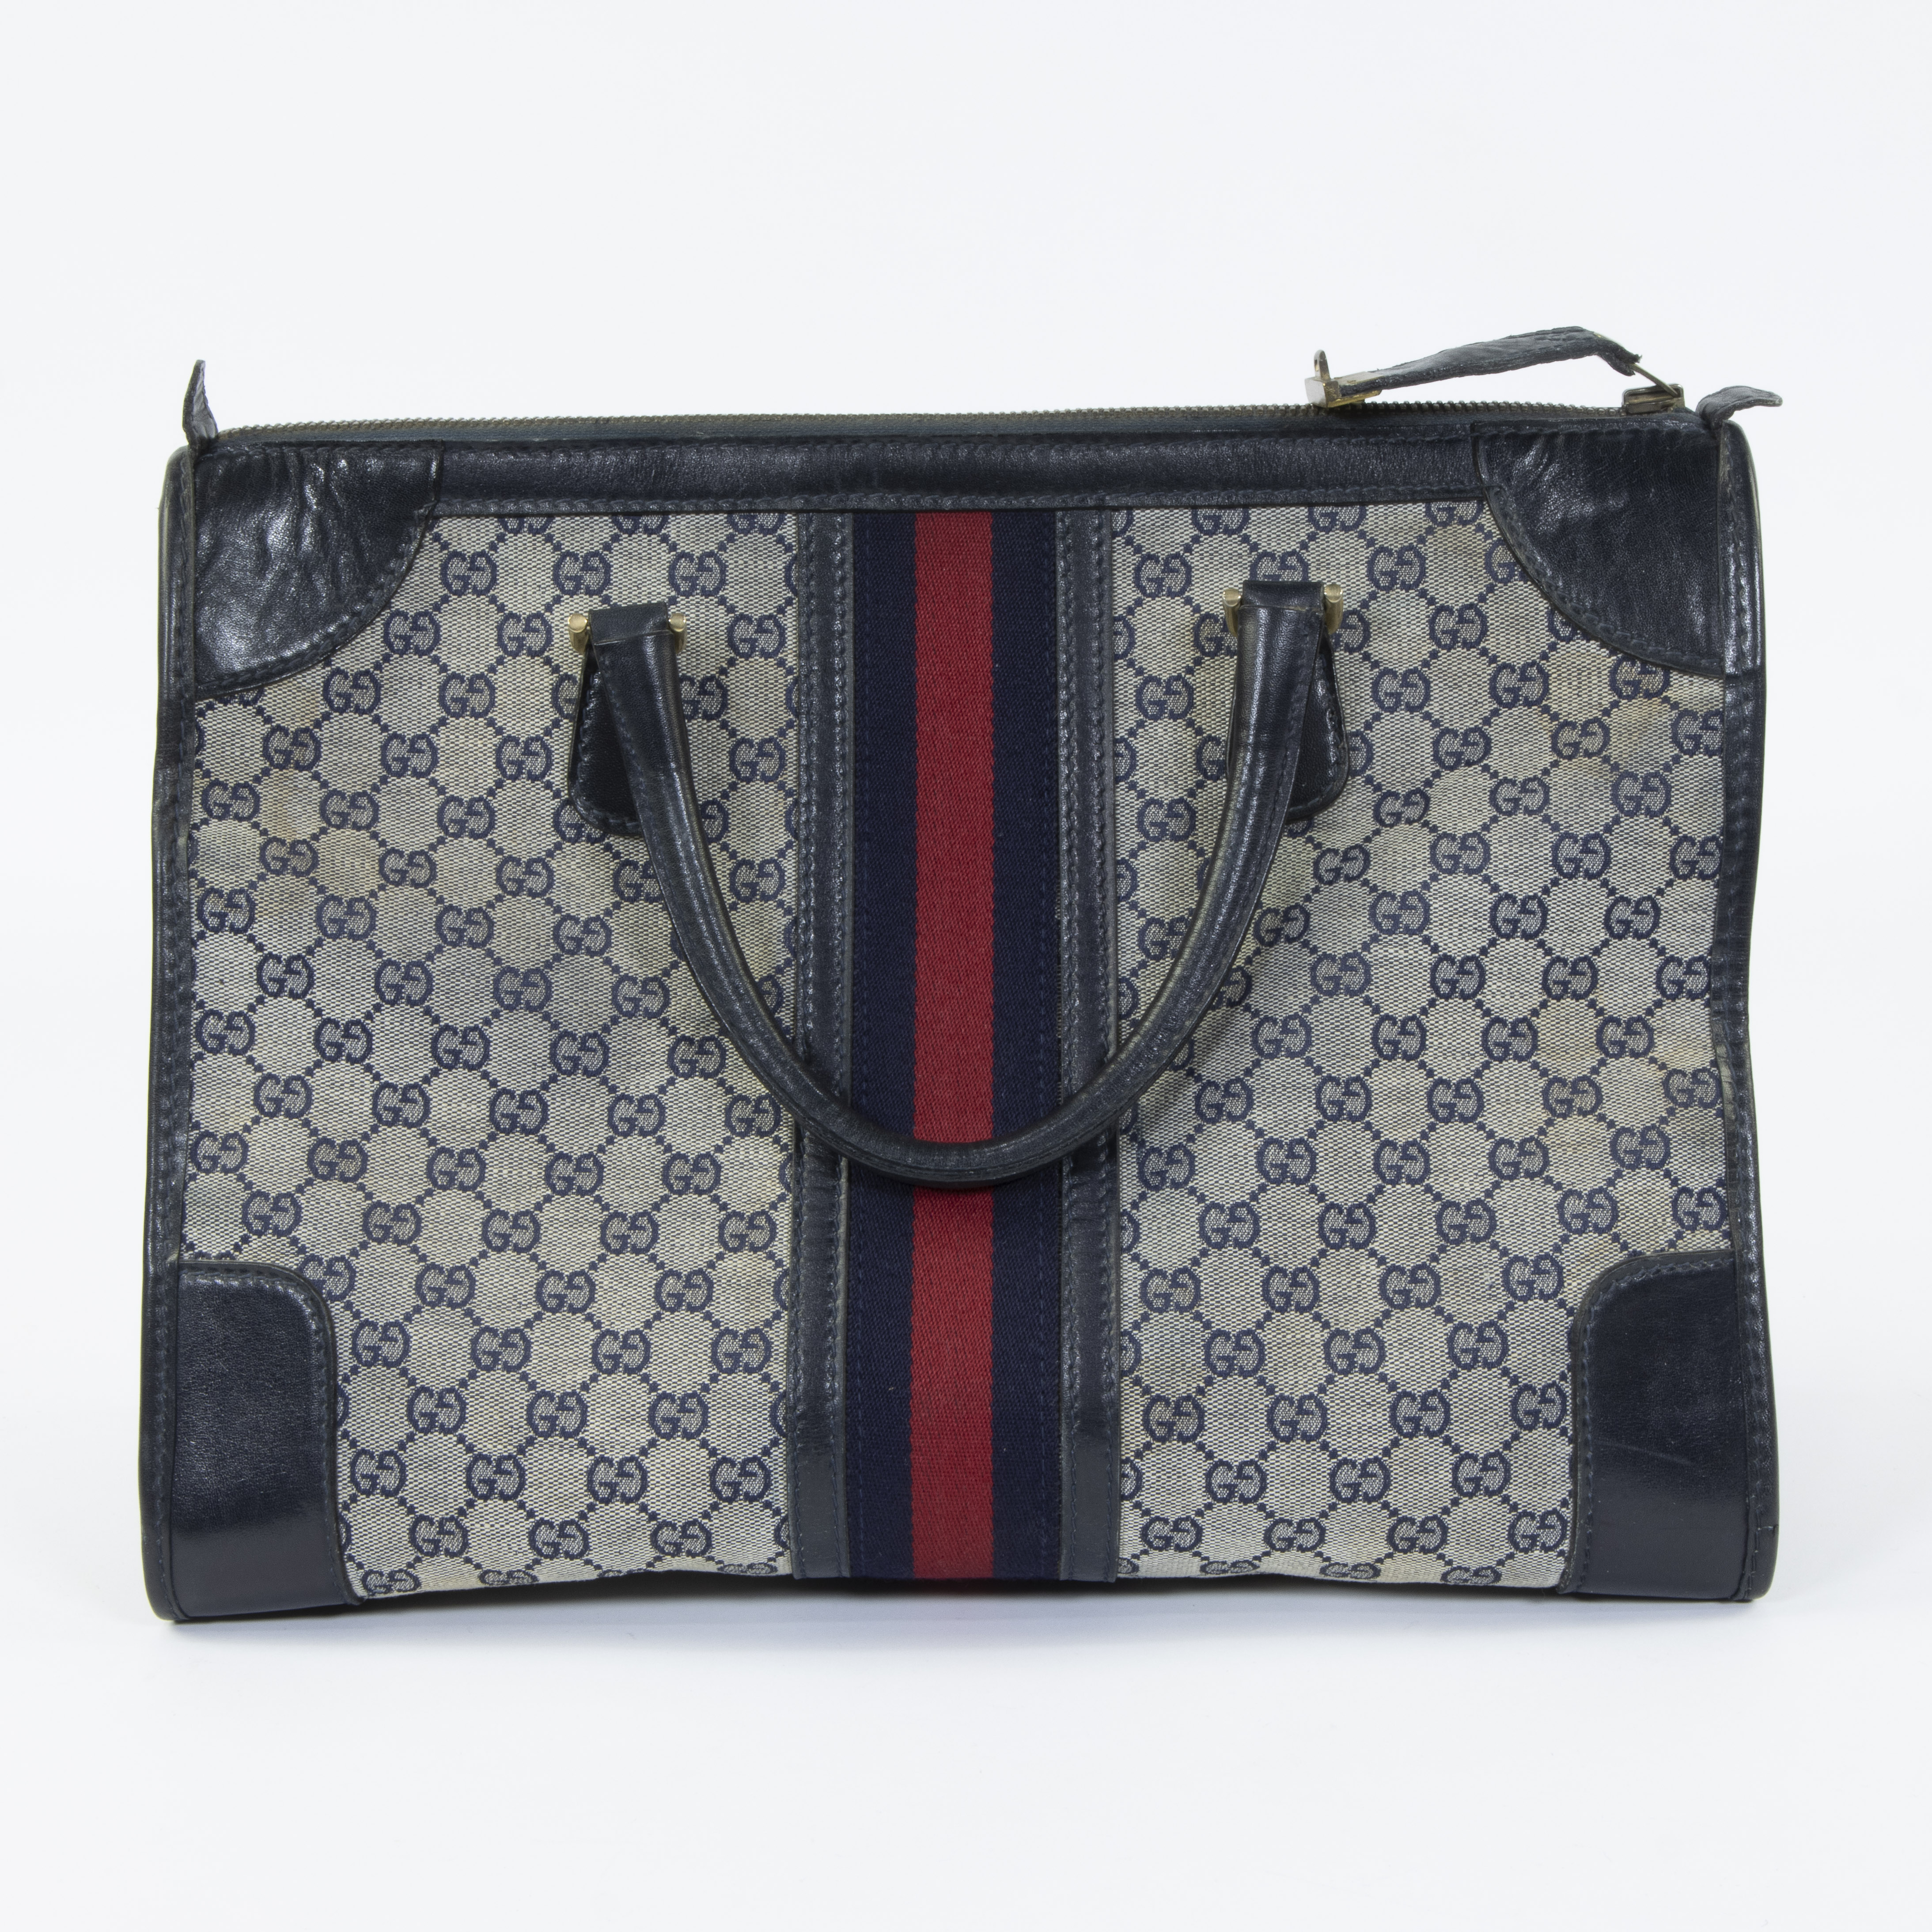 Gucci travel bag and pouch - Image 2 of 9